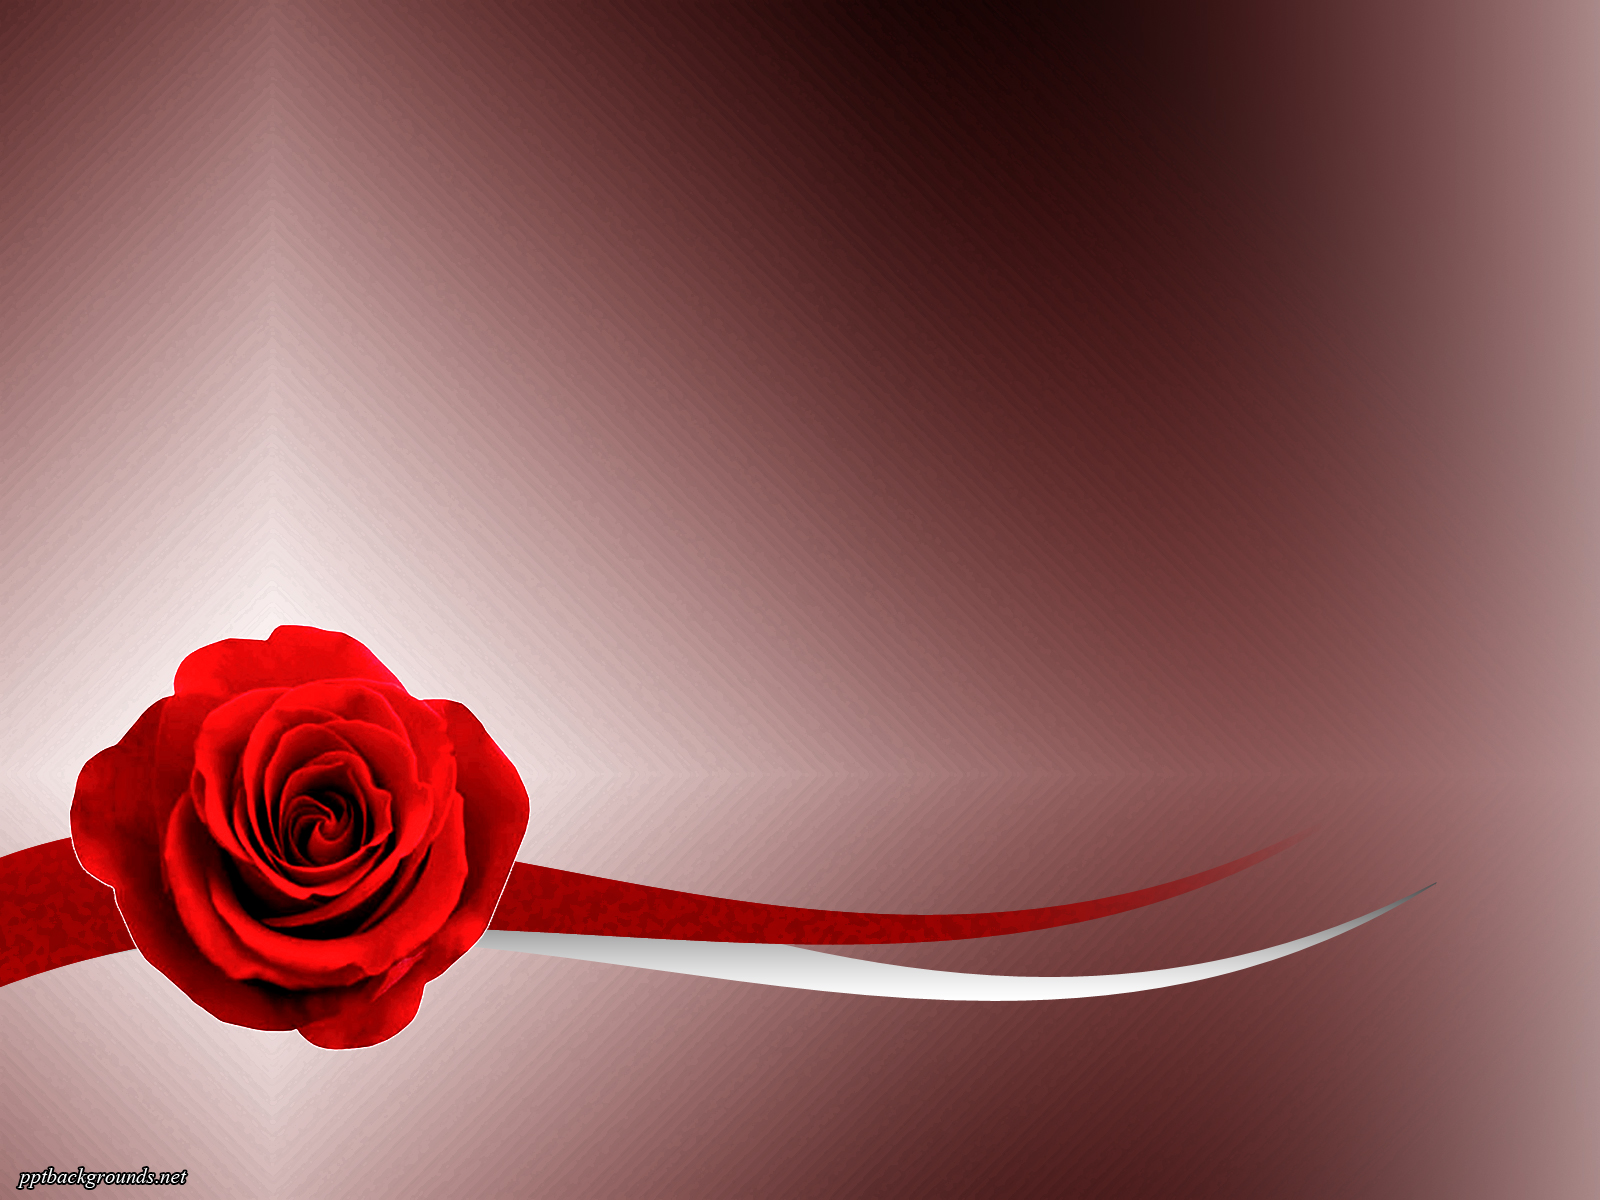 download free powerpoint templates red roses